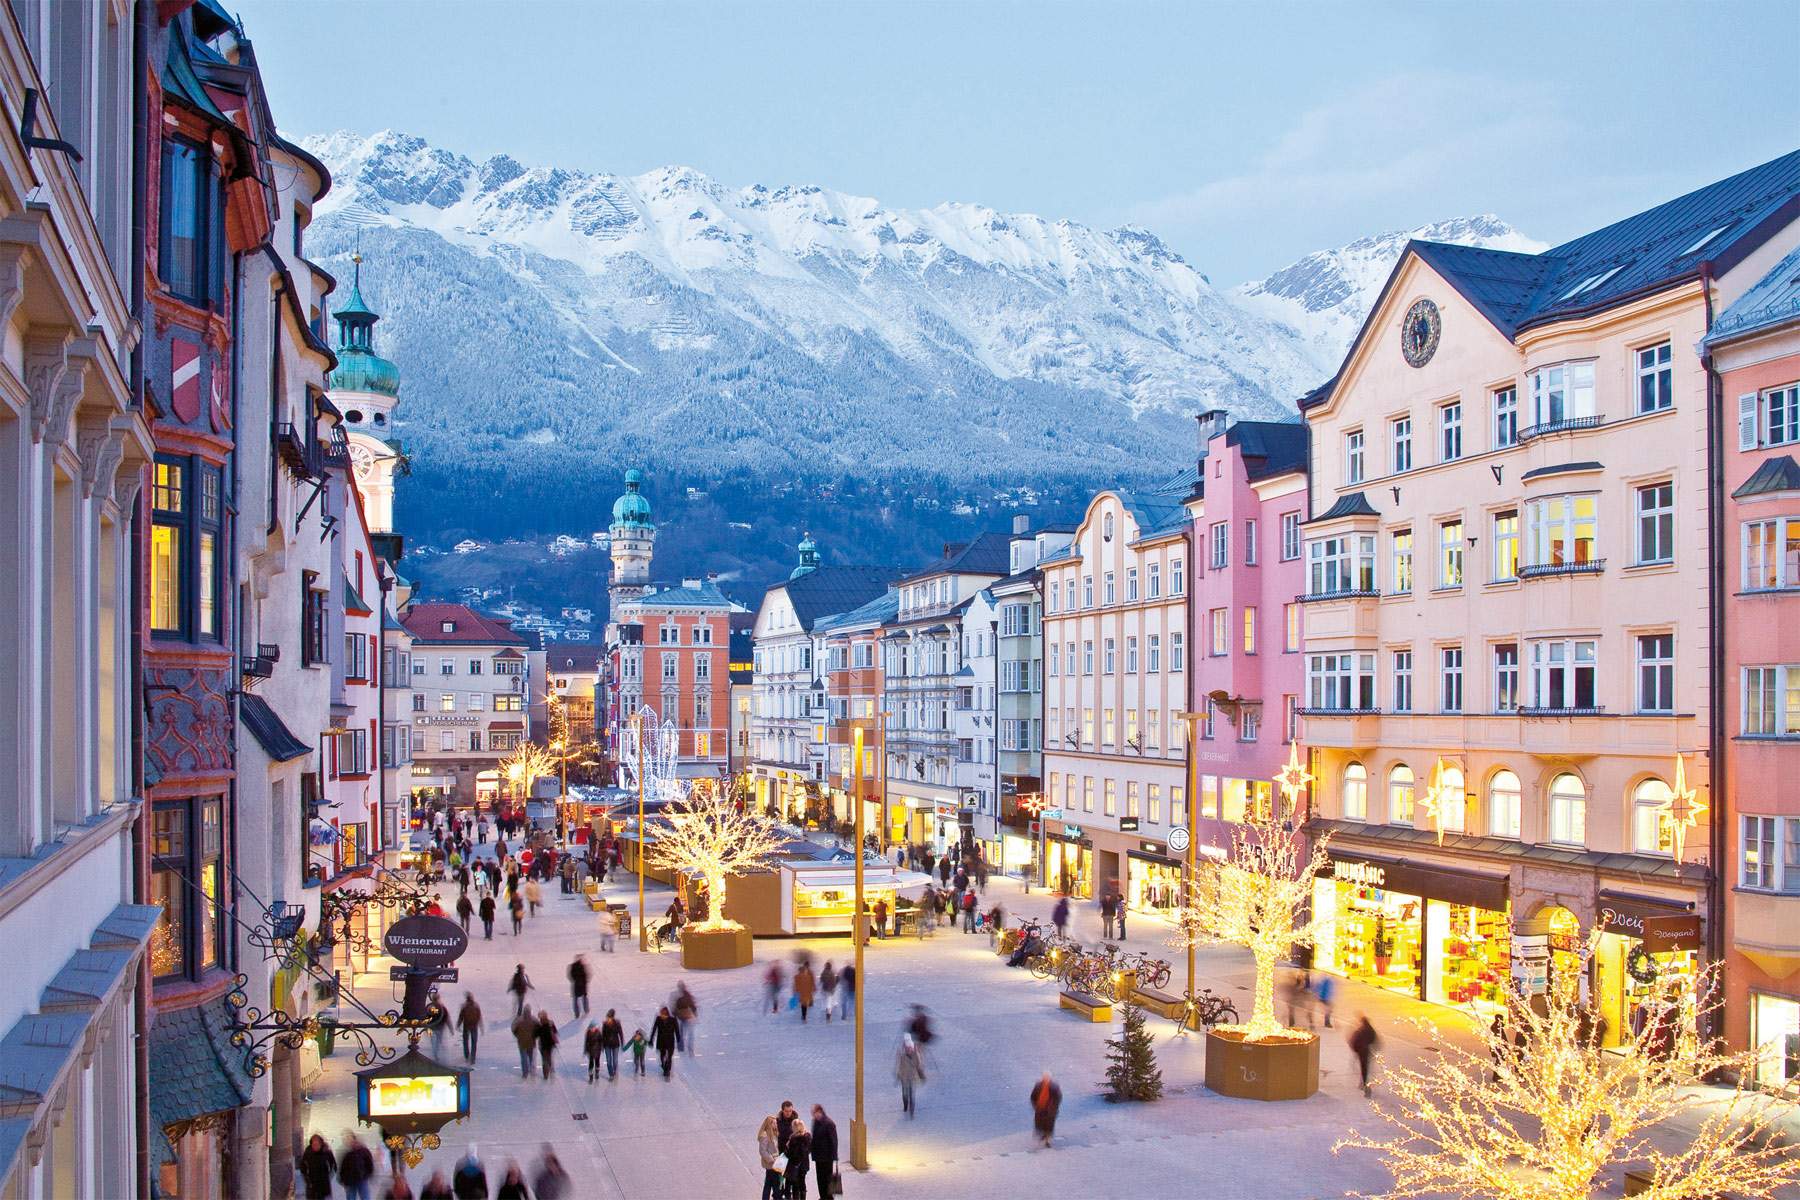 Innsbruck city of art: 5 museums to learn about art in the capital of Tyrol